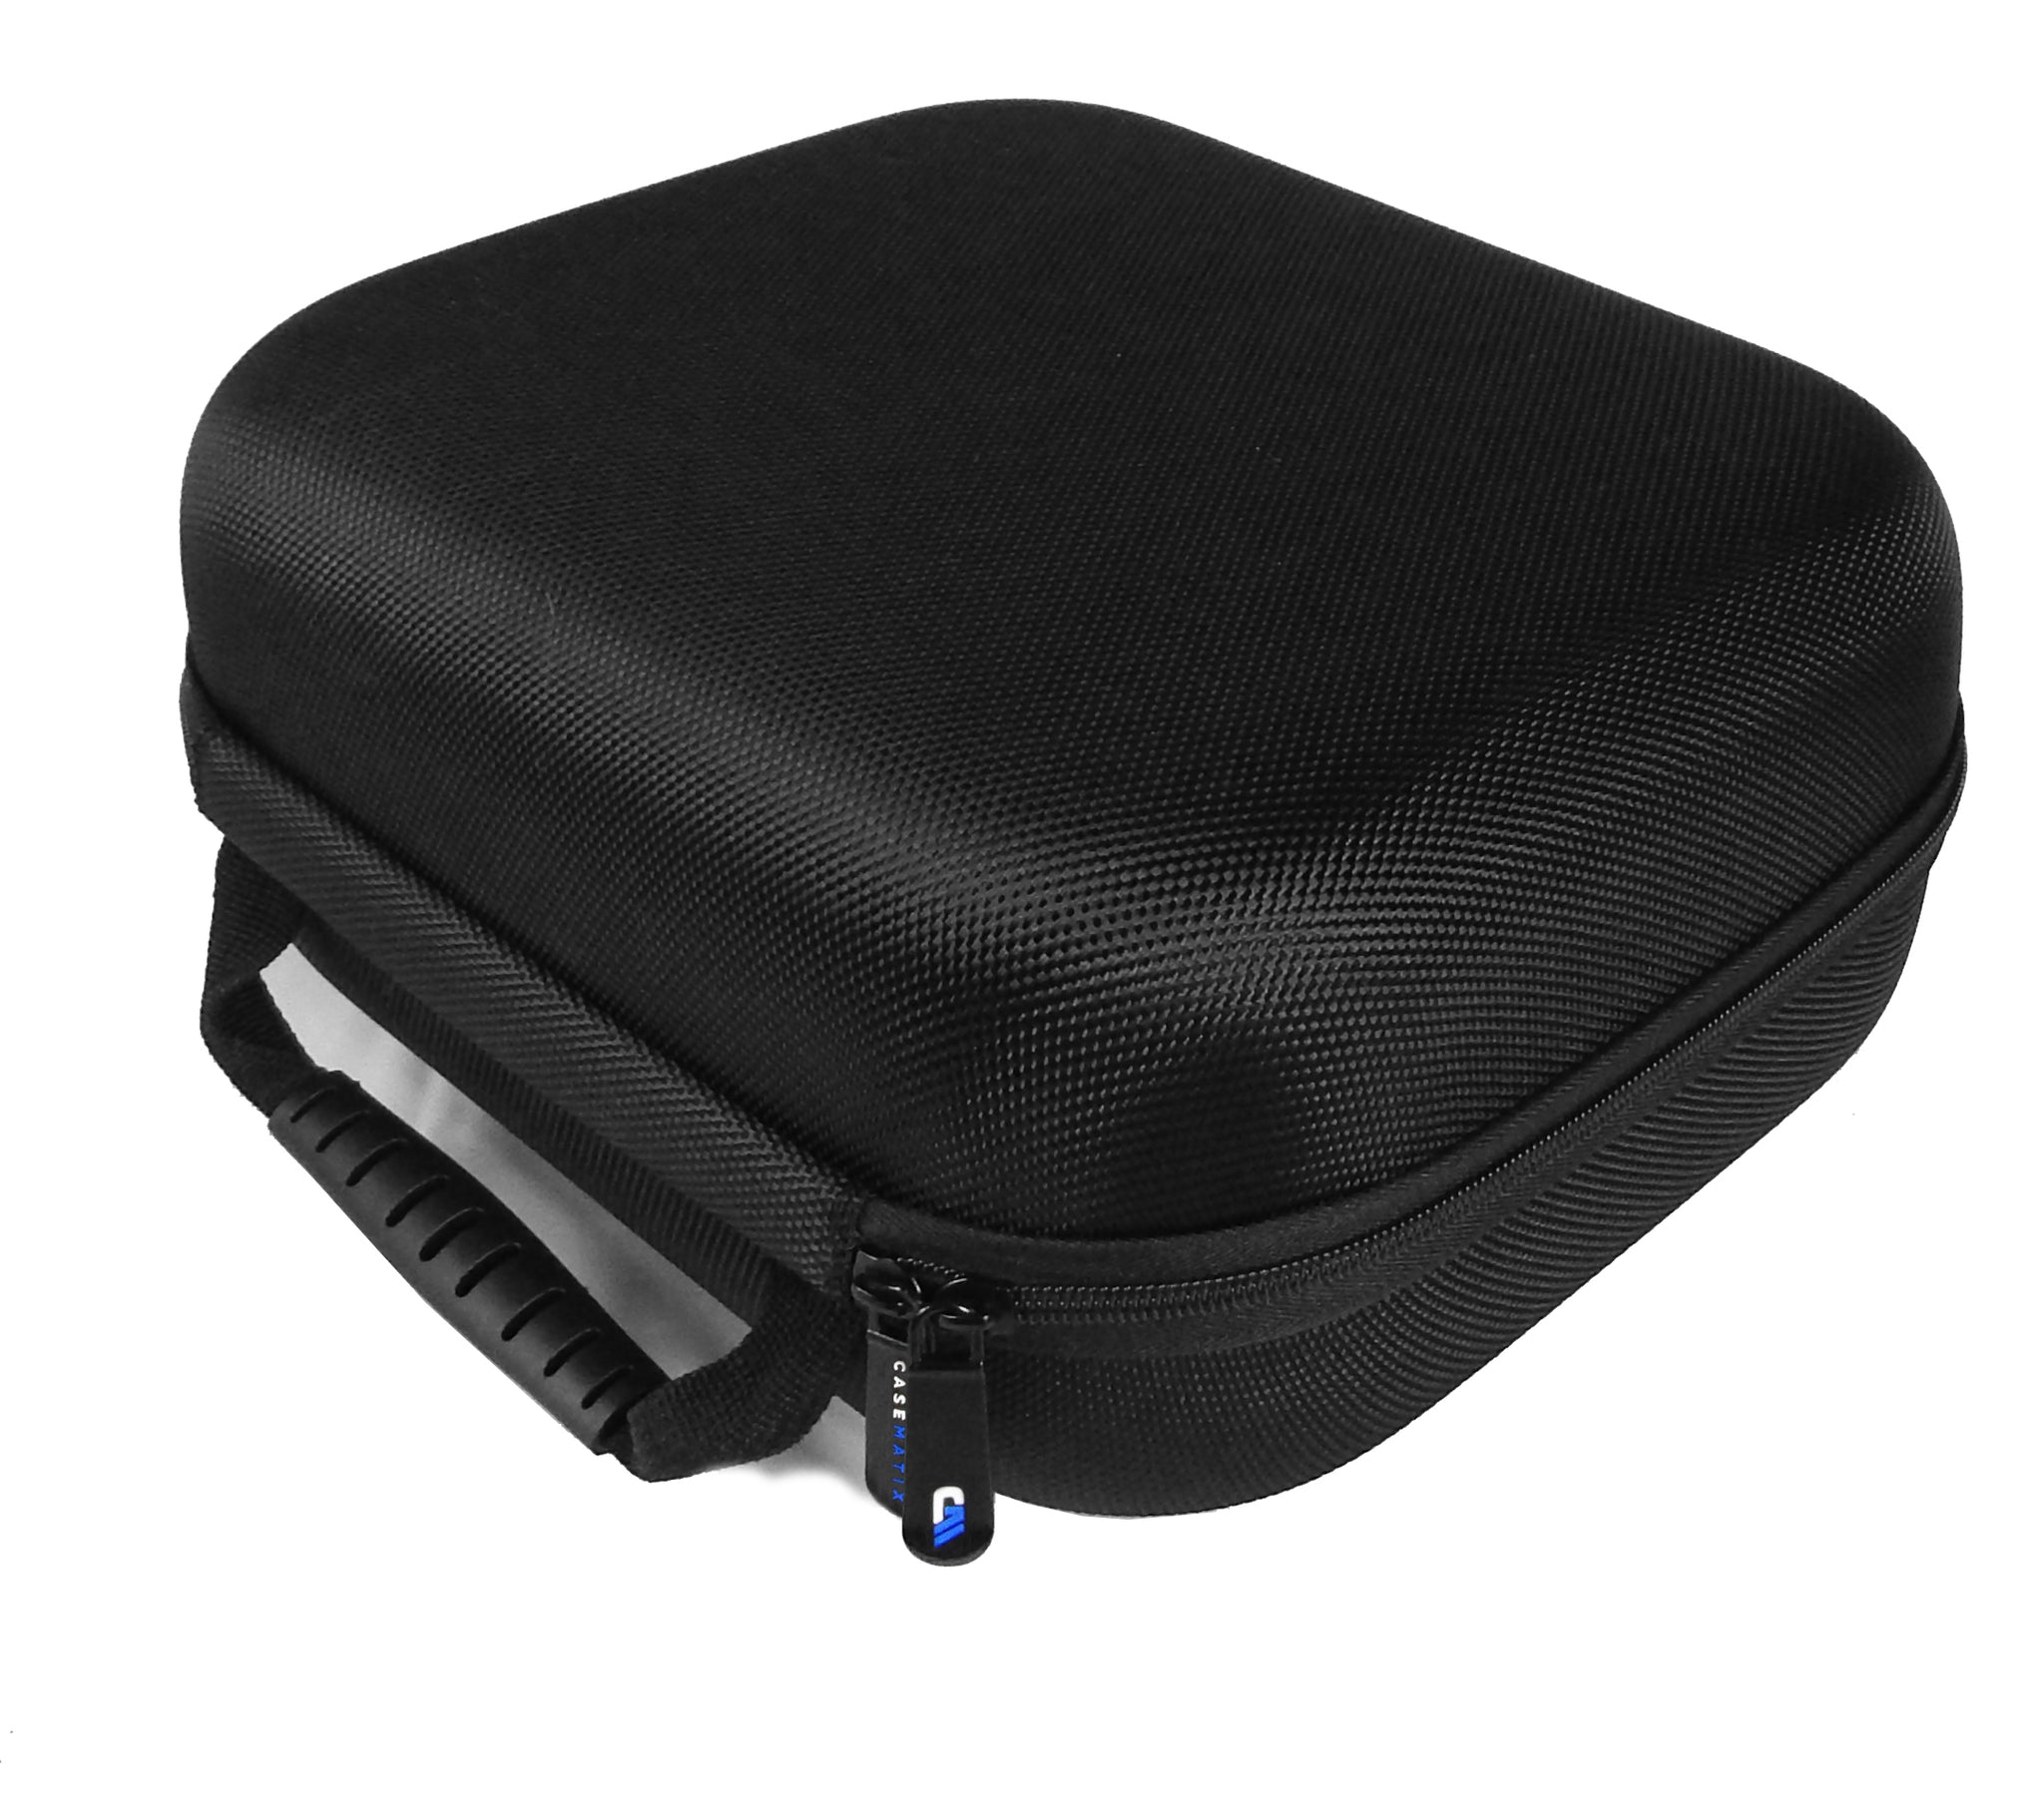 TUDIA Eva Empty Case Compatible with Omron BP7100 3 Series, Omron Bp742n 5 Series / Model 7200, Hard Storage Travel Case for Upper Arm Blood Pressure